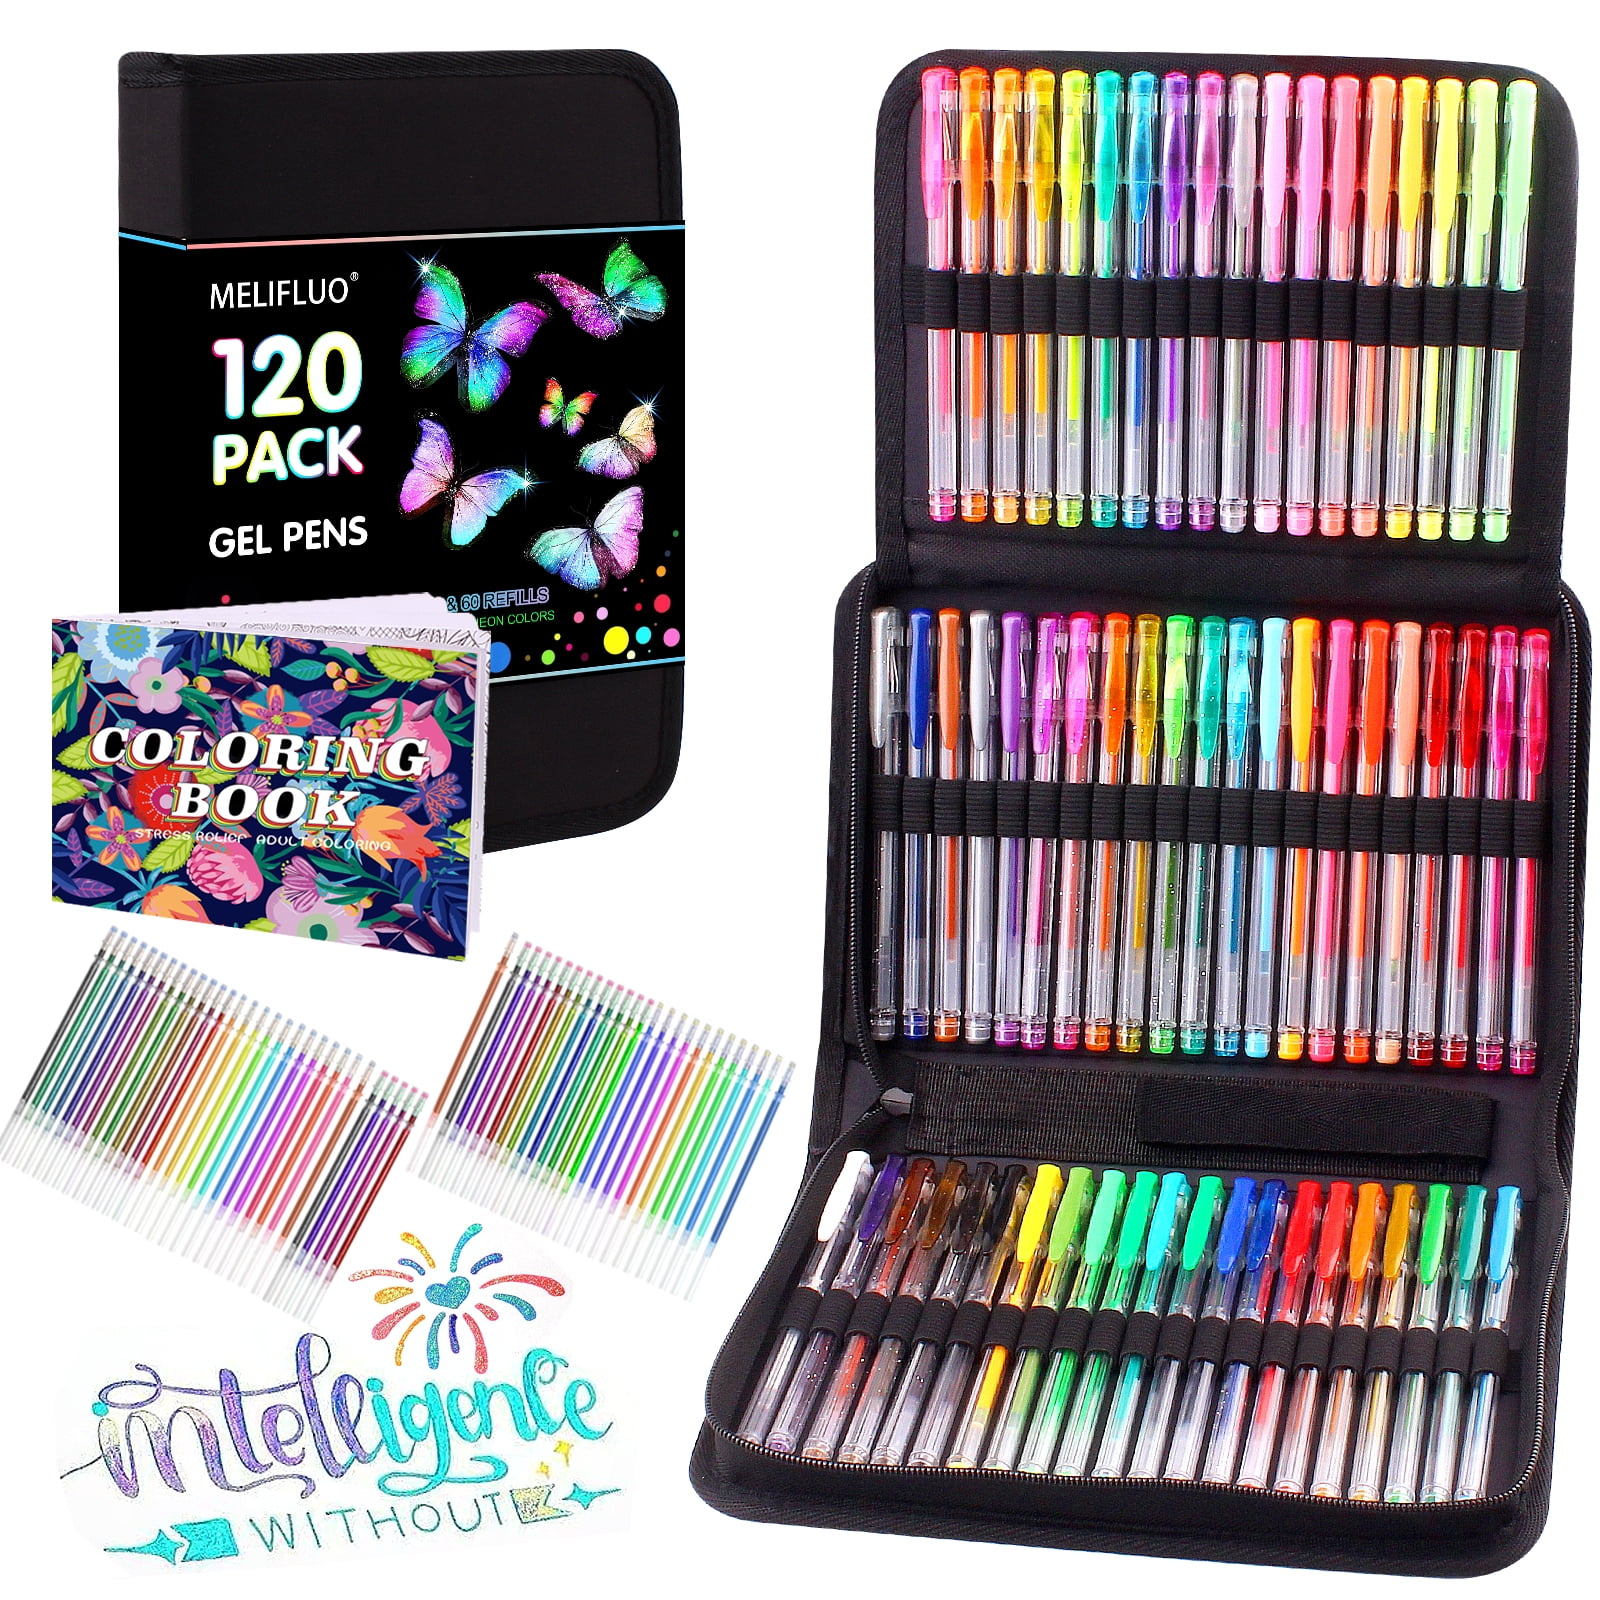 120 Pack Gel Pen Set 60 Colored Gel Pen with 60 Refills for Adults Coloring